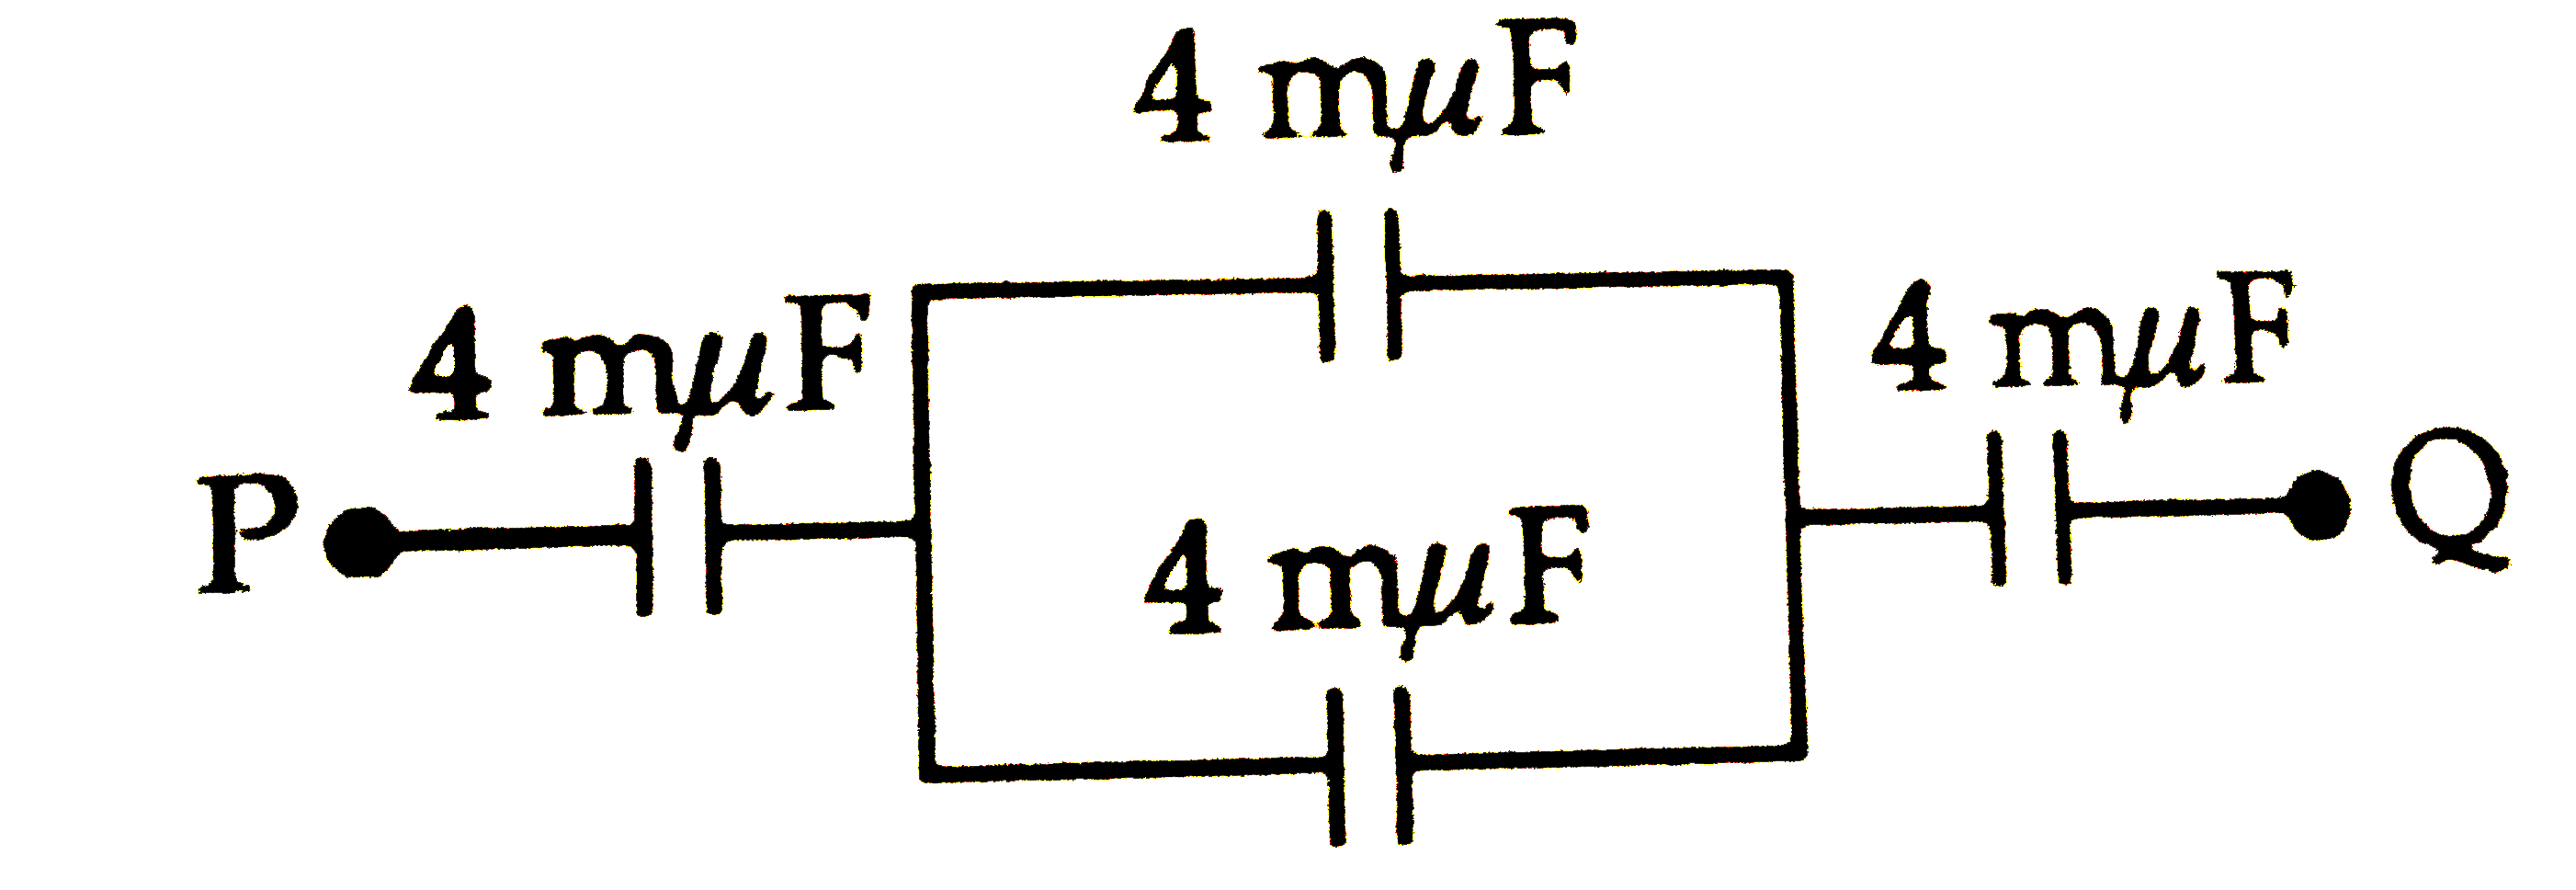 Four condensers each of capacity 4muF are connected as shown in the adjoining figure.   If V(P)-V(Q)=15V, the energy stored in the system is